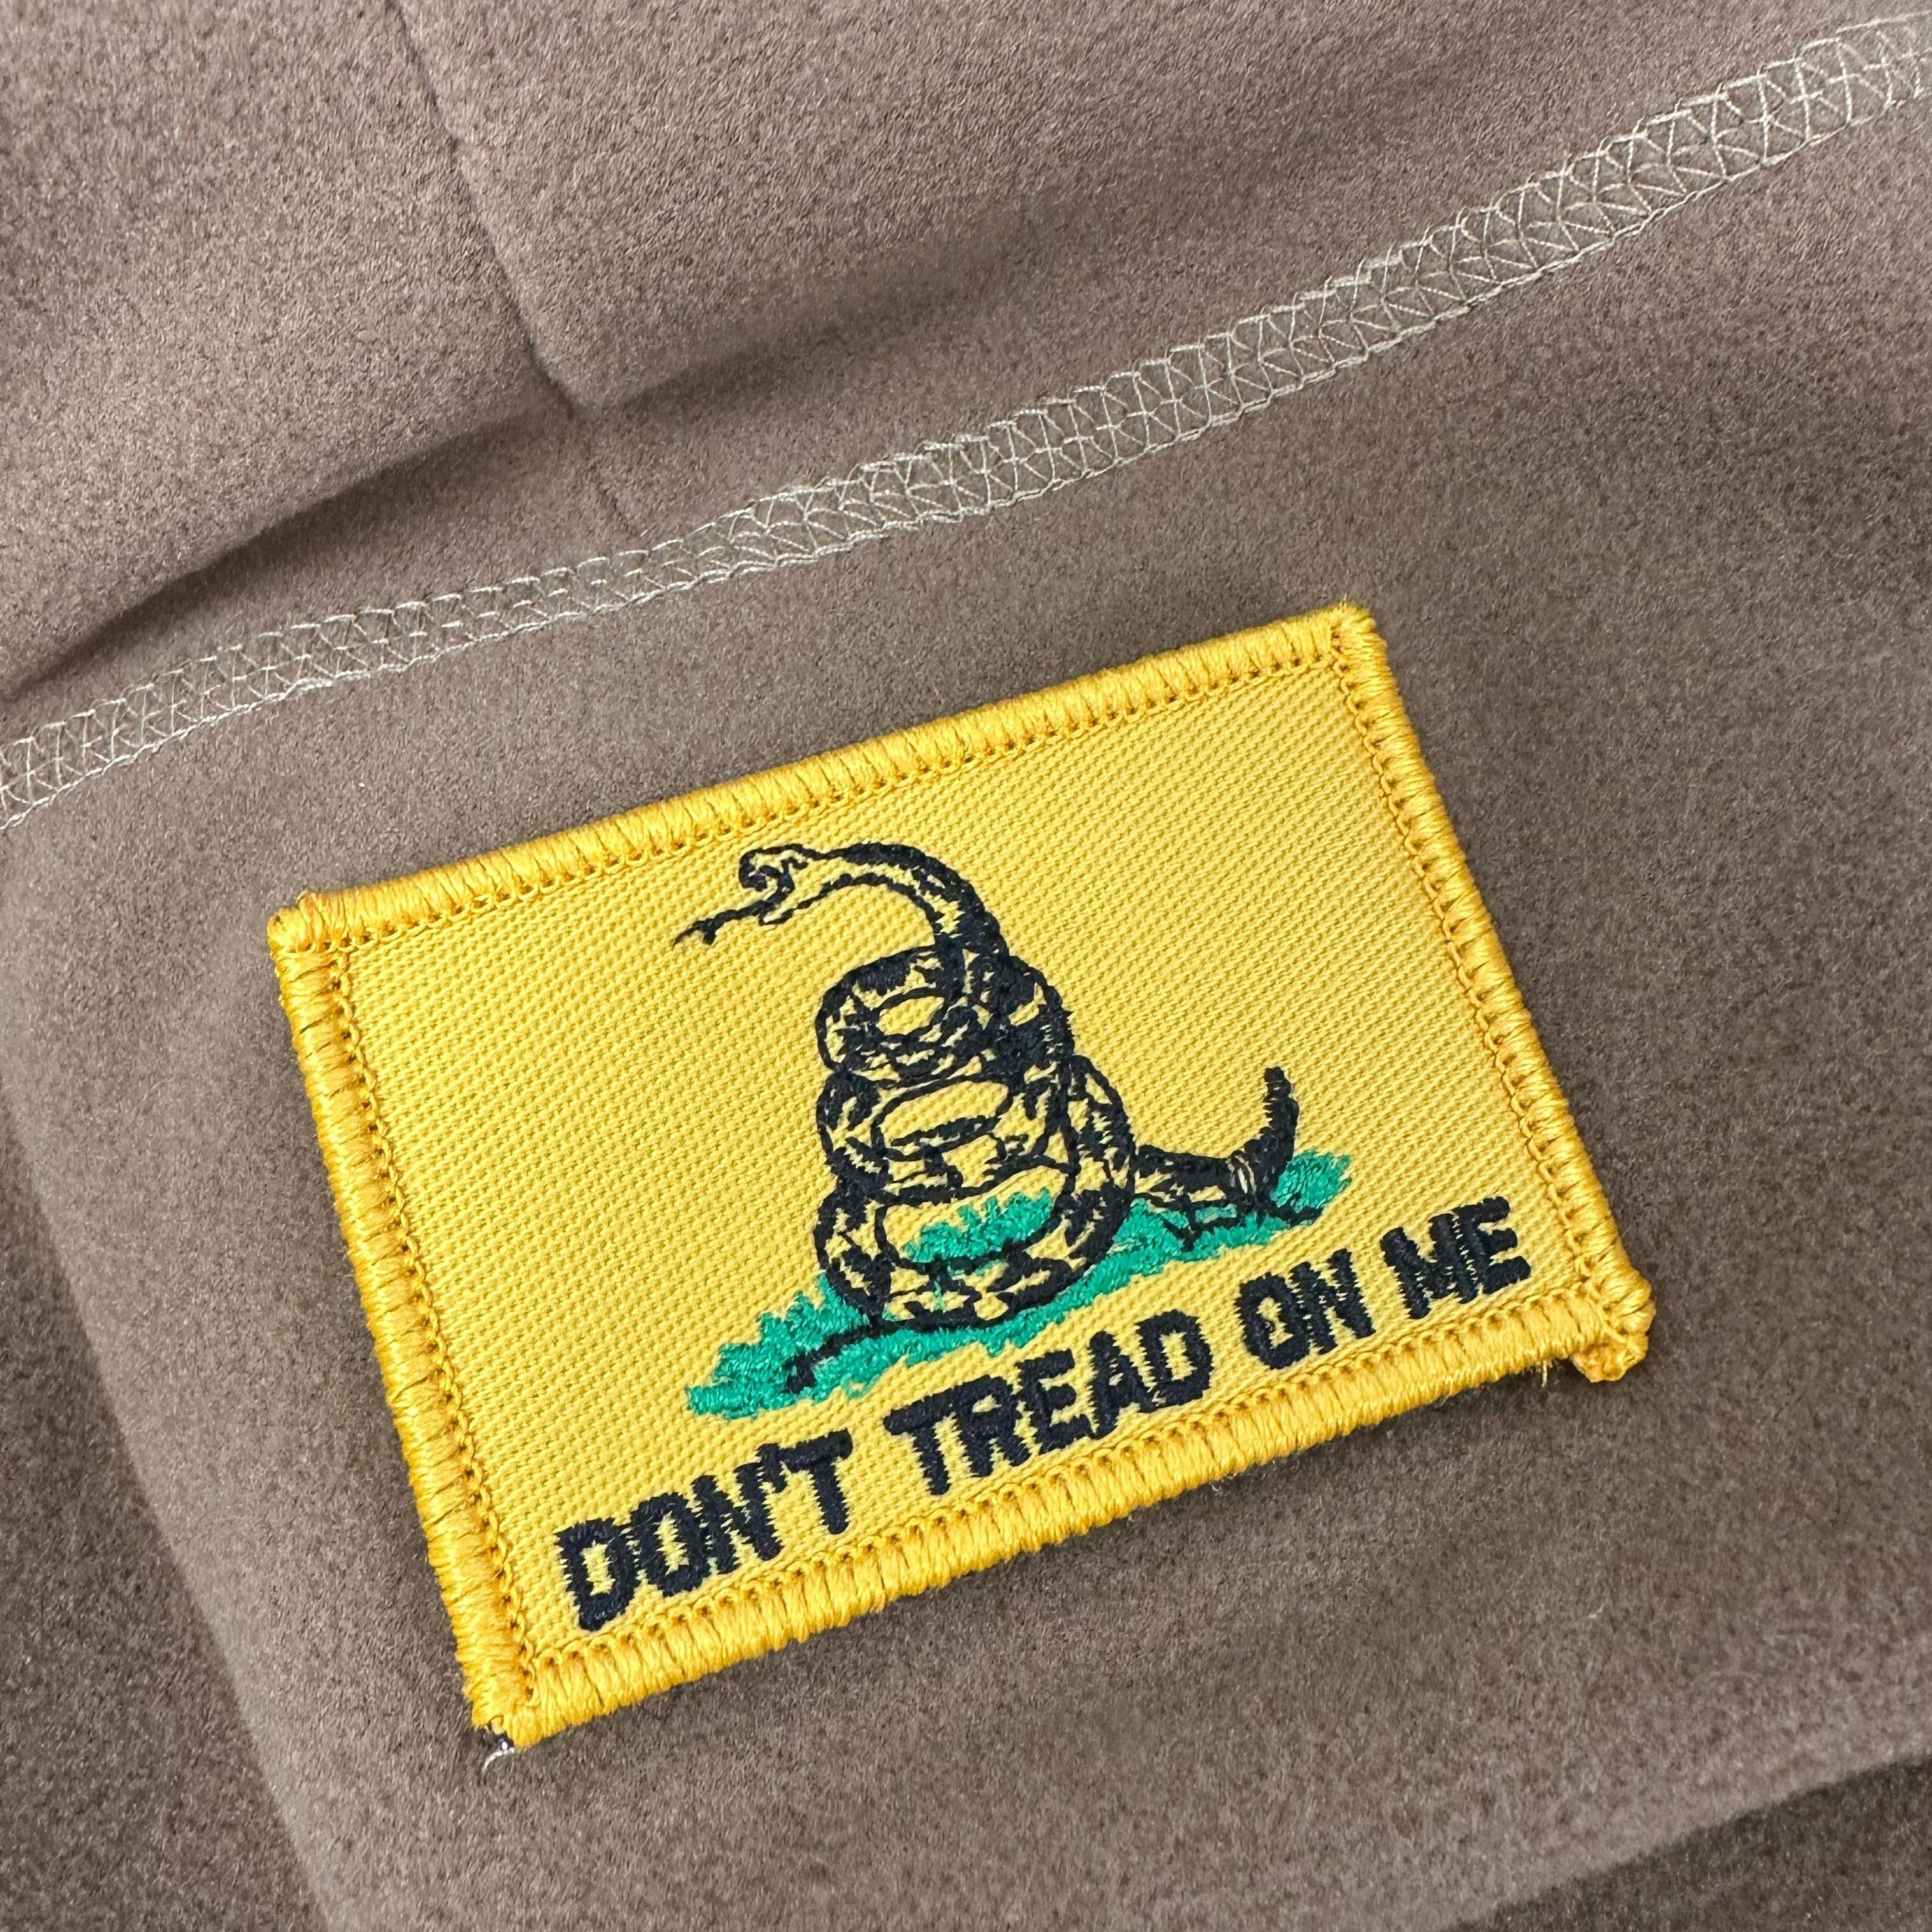 Tactical Gear Junkie Patches Don't Tread on Me Gadsden Snake - 2x3 Patch